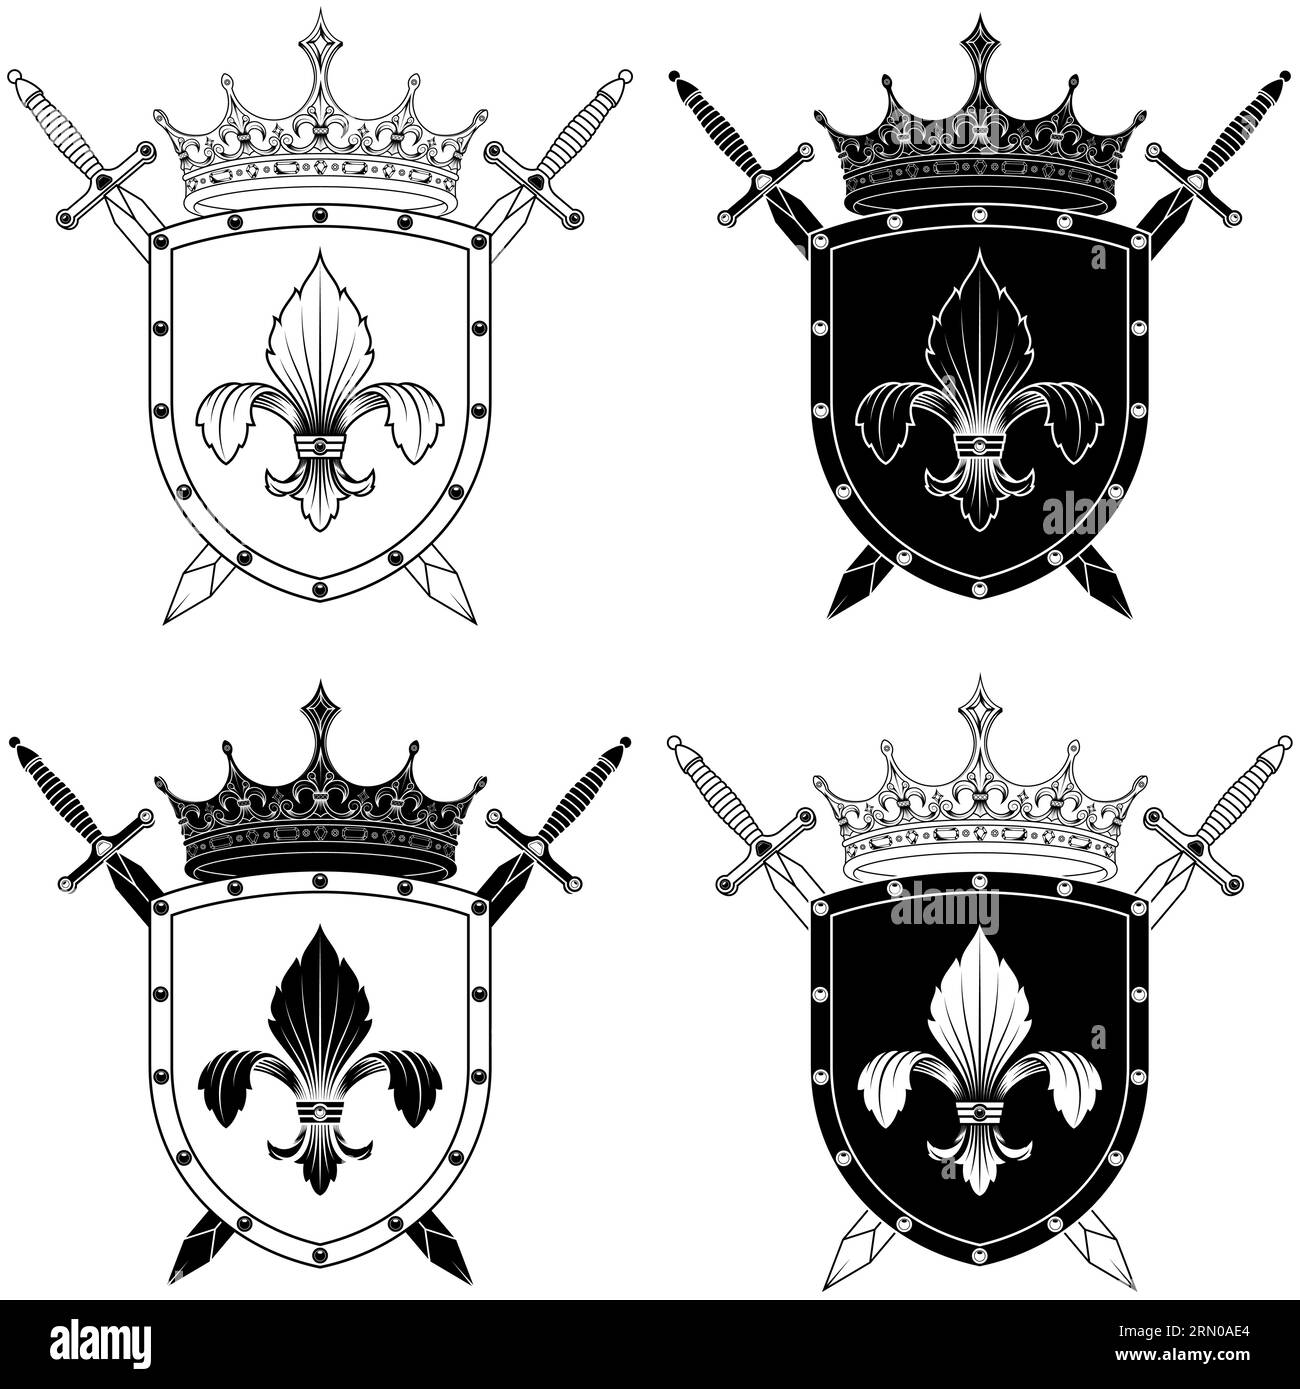 Crowned heraldic shield with lily flower and two swords. heraldic shield of the middle ages Stock Vector